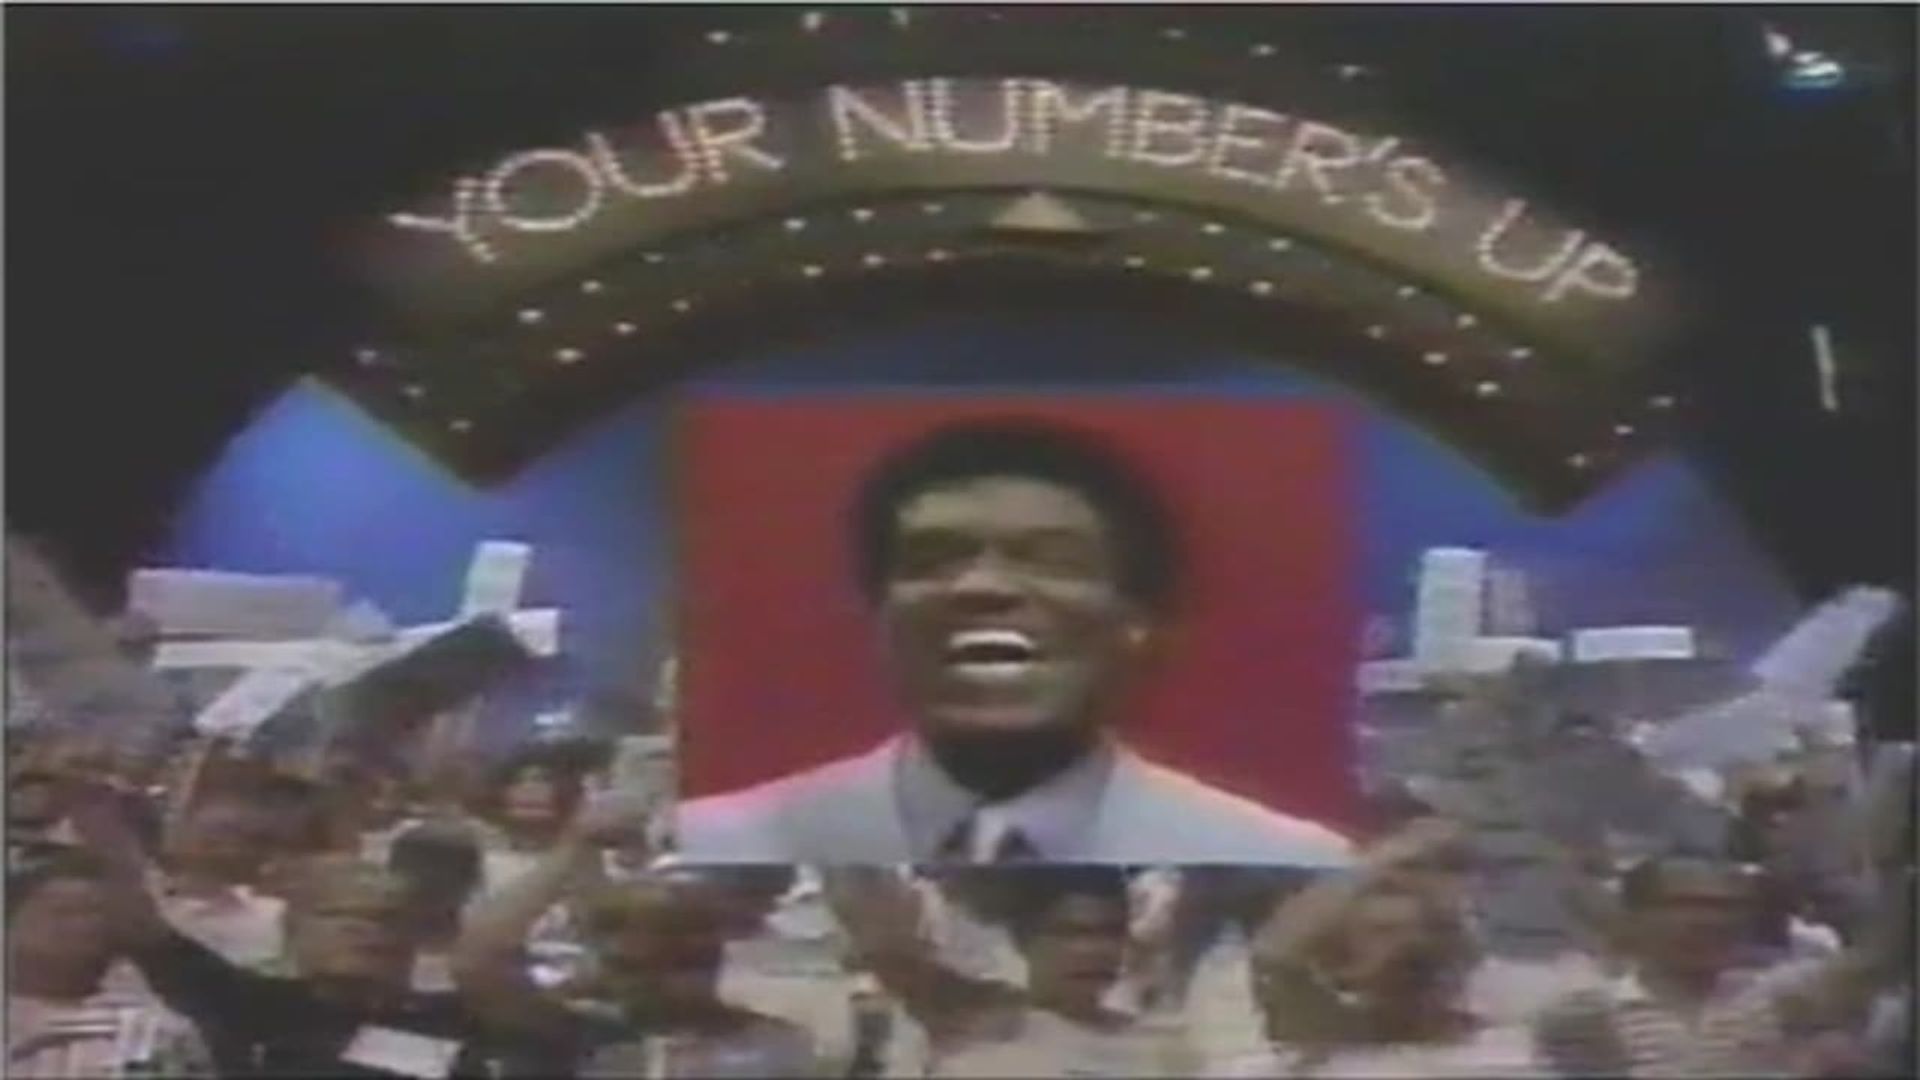 Your Number's Up background